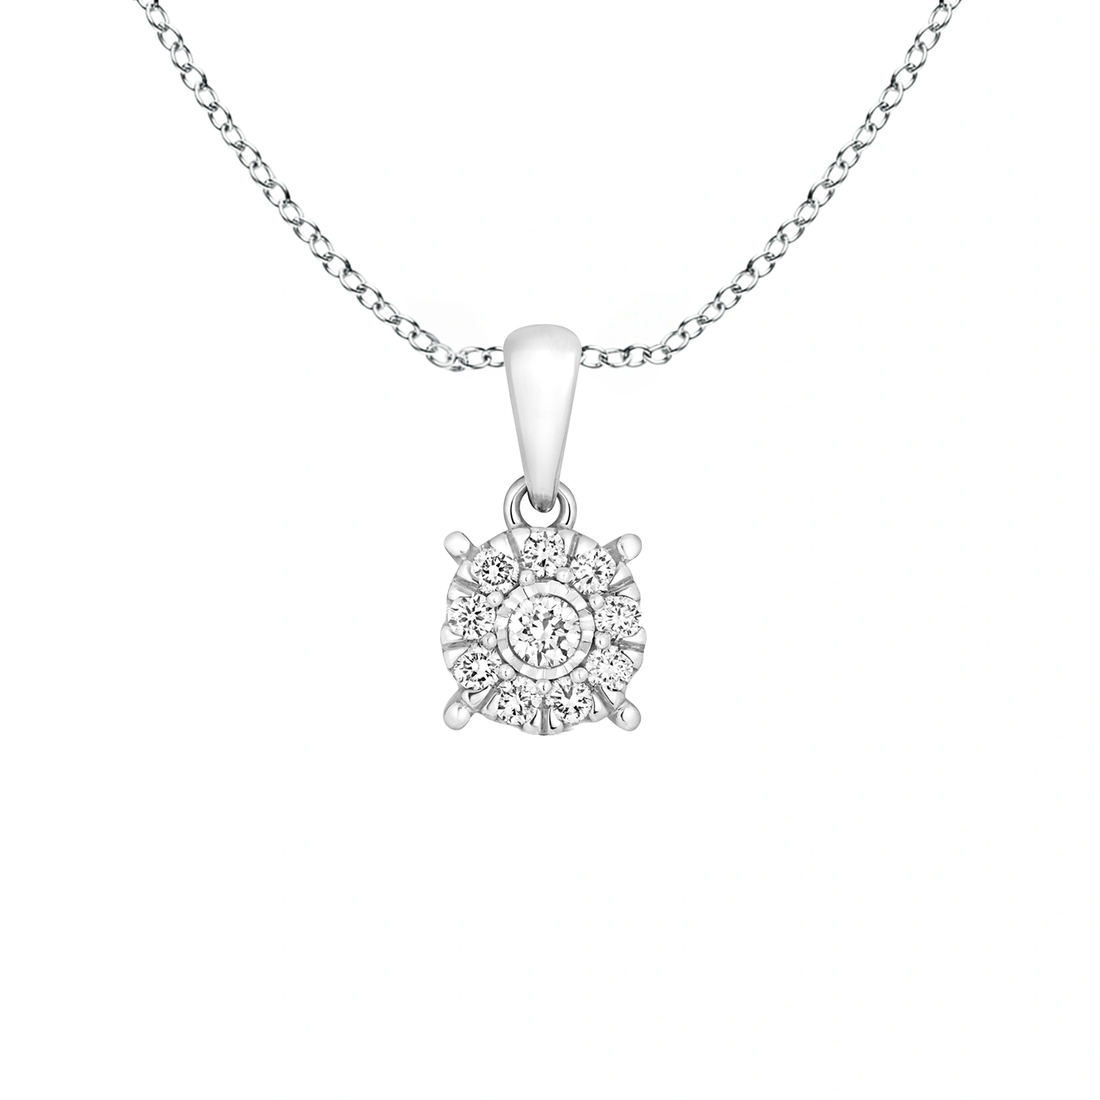 18ct White Gold Diamond Solitaire Solid Bale Pendant with Chain - Robert Anthony Jewellers, Edinburgh